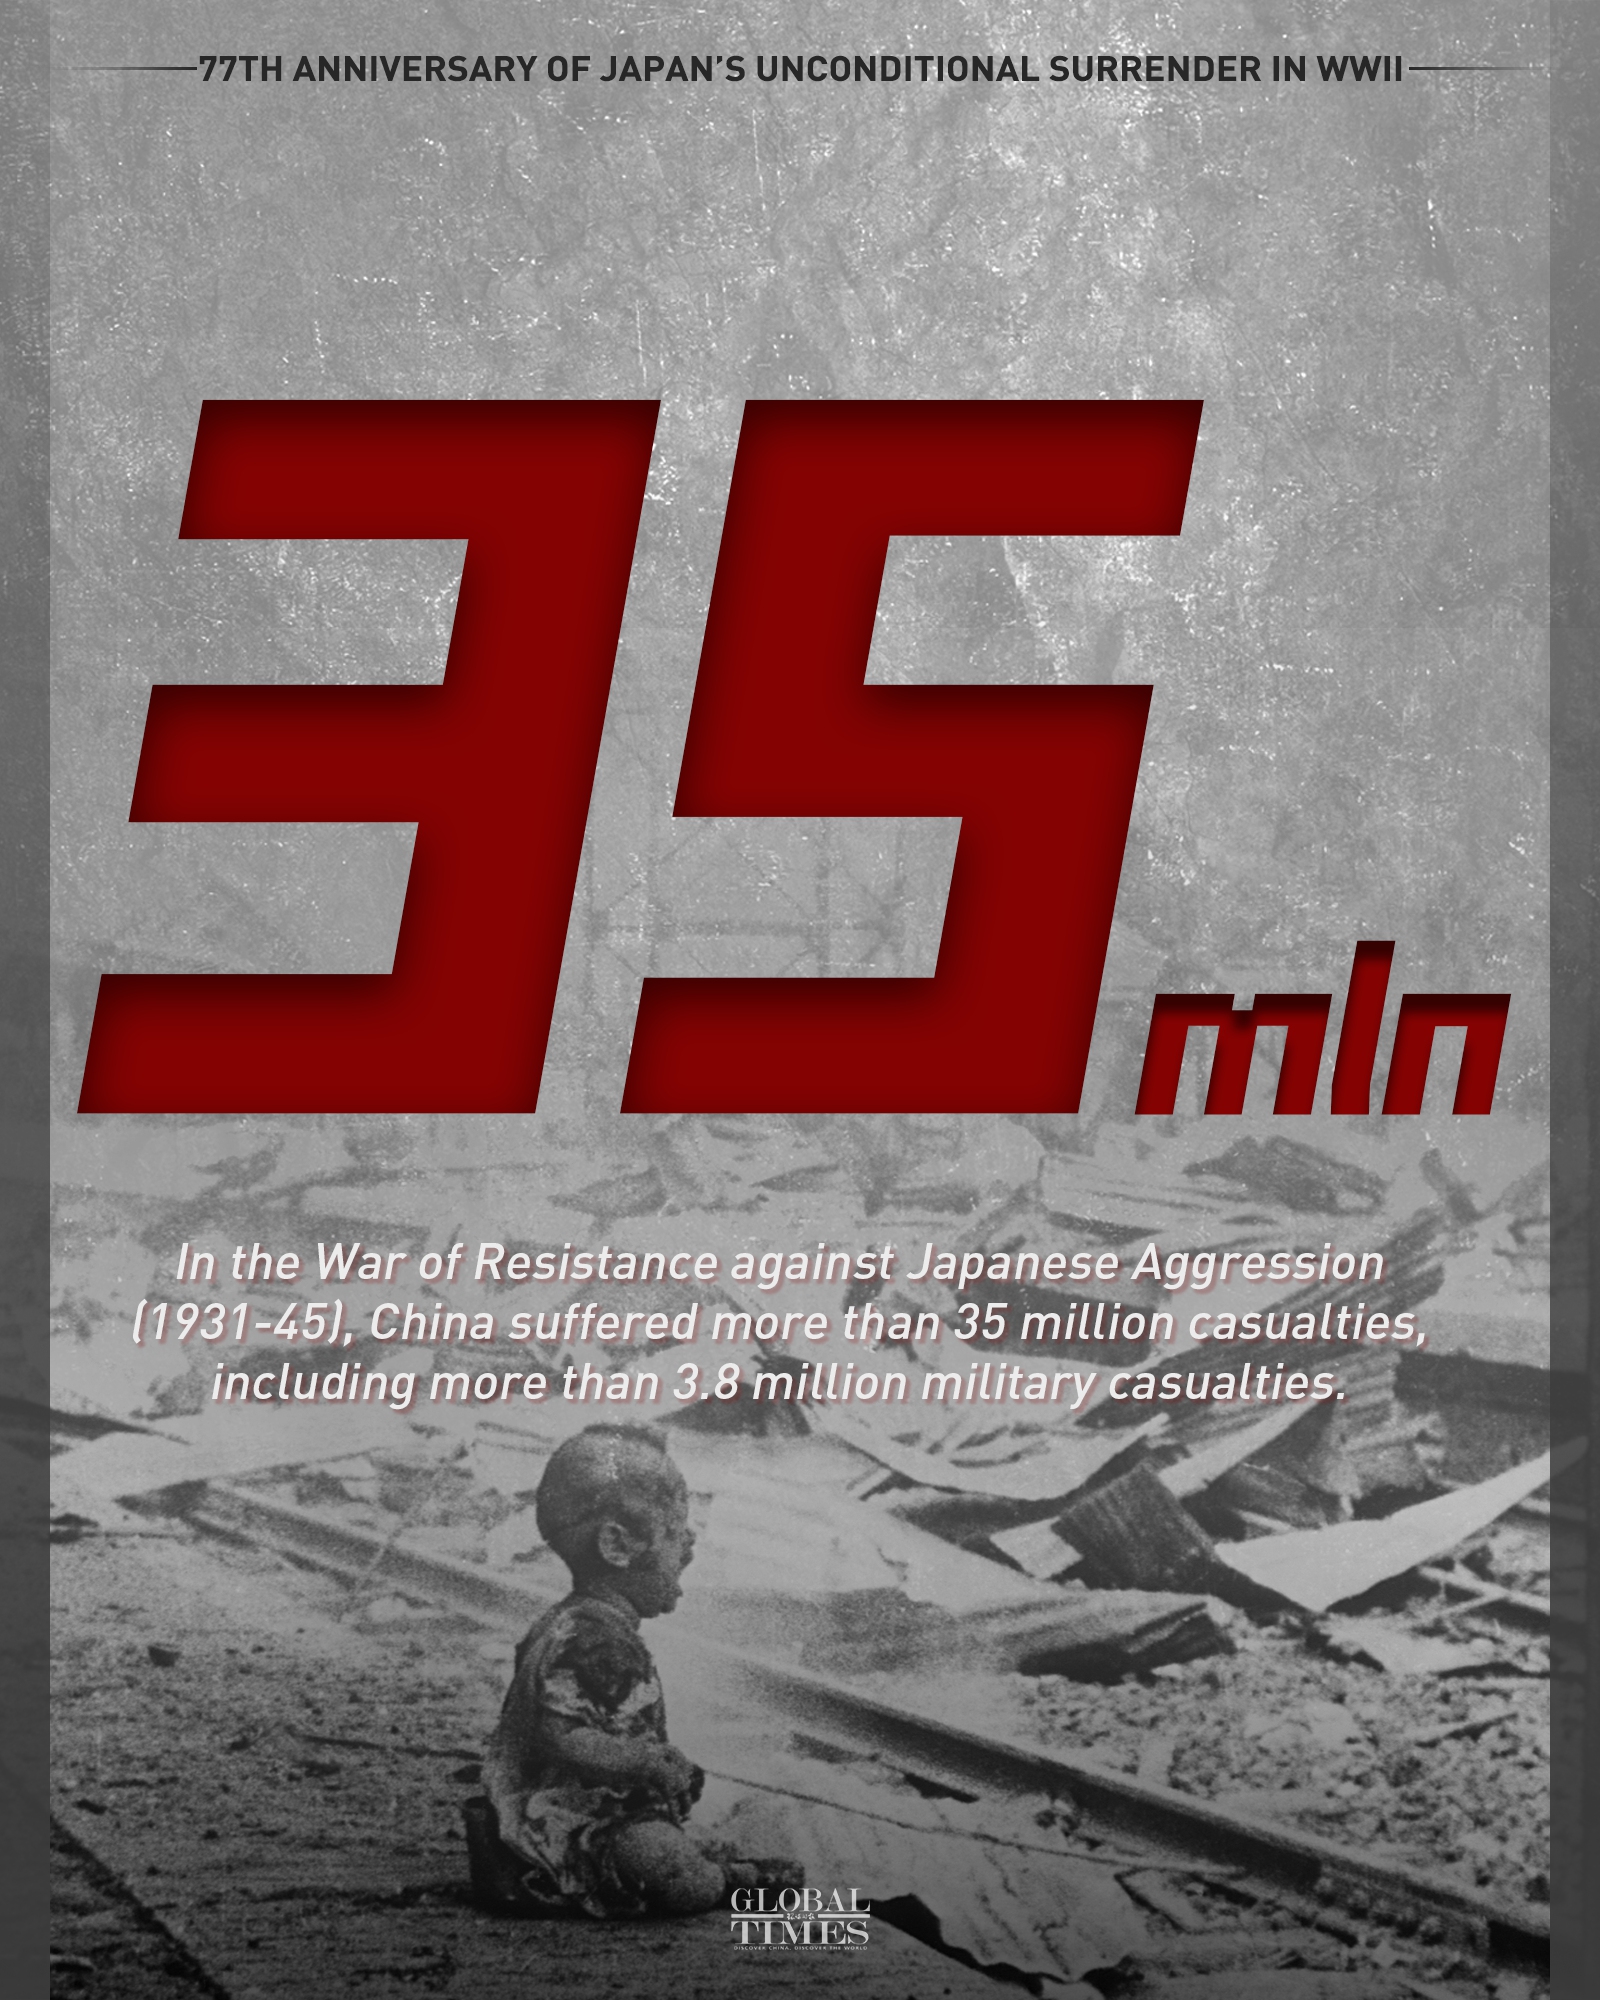  Japanese aggression in numbers Graphic: Deng Zijun/GT